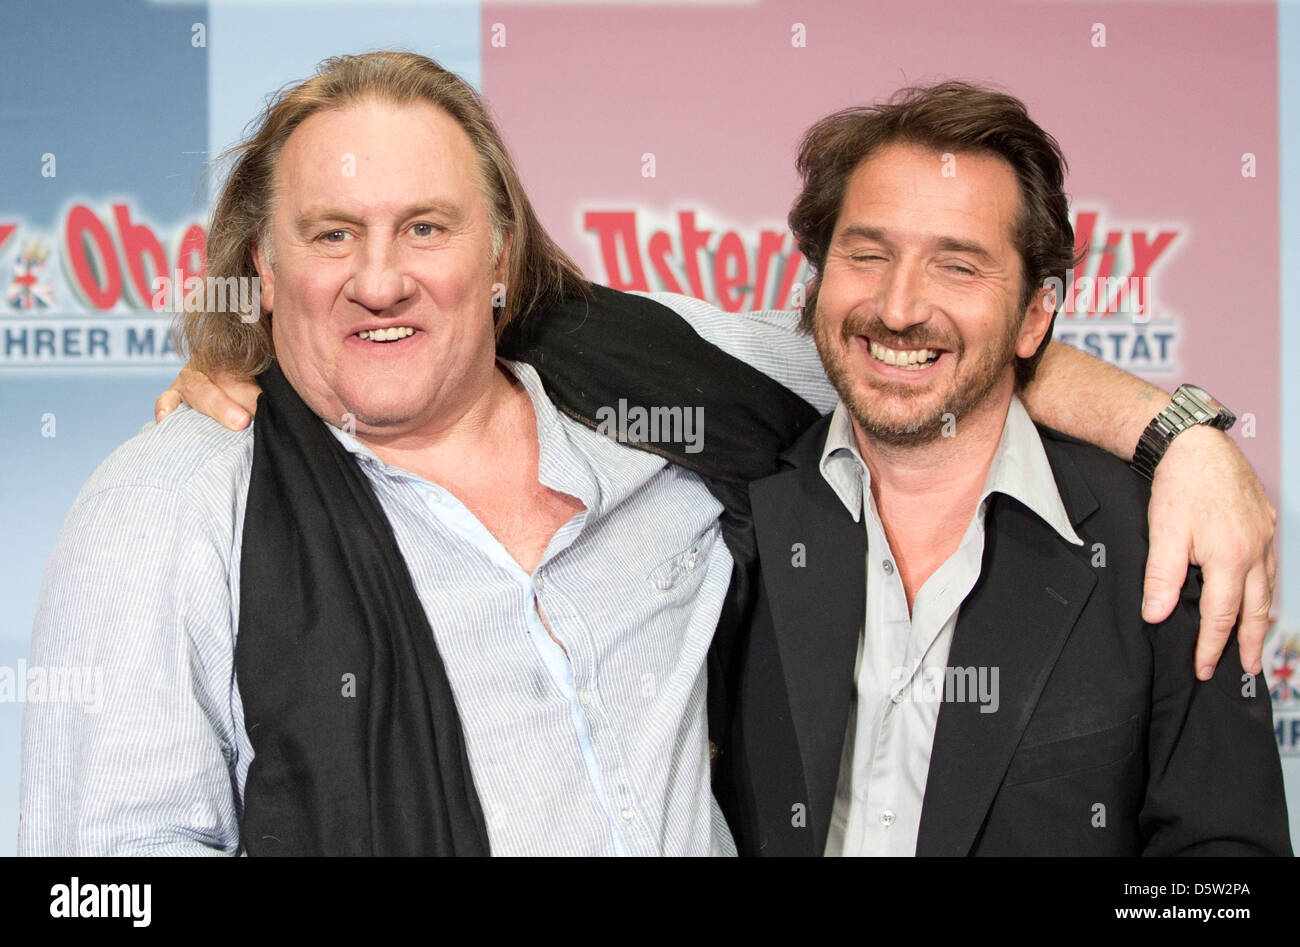 Actors Gerard Depardieu (L) Edouard Baer pose during a photocall for their new movie 'Asterix & Obelix - On Her Majesty's Service'  in Berlin, Germany, 01 October 2012. The mocie will come to German cinemas on 18 October 2012. Photo: JOERG CARSTENSEN Stock Photo